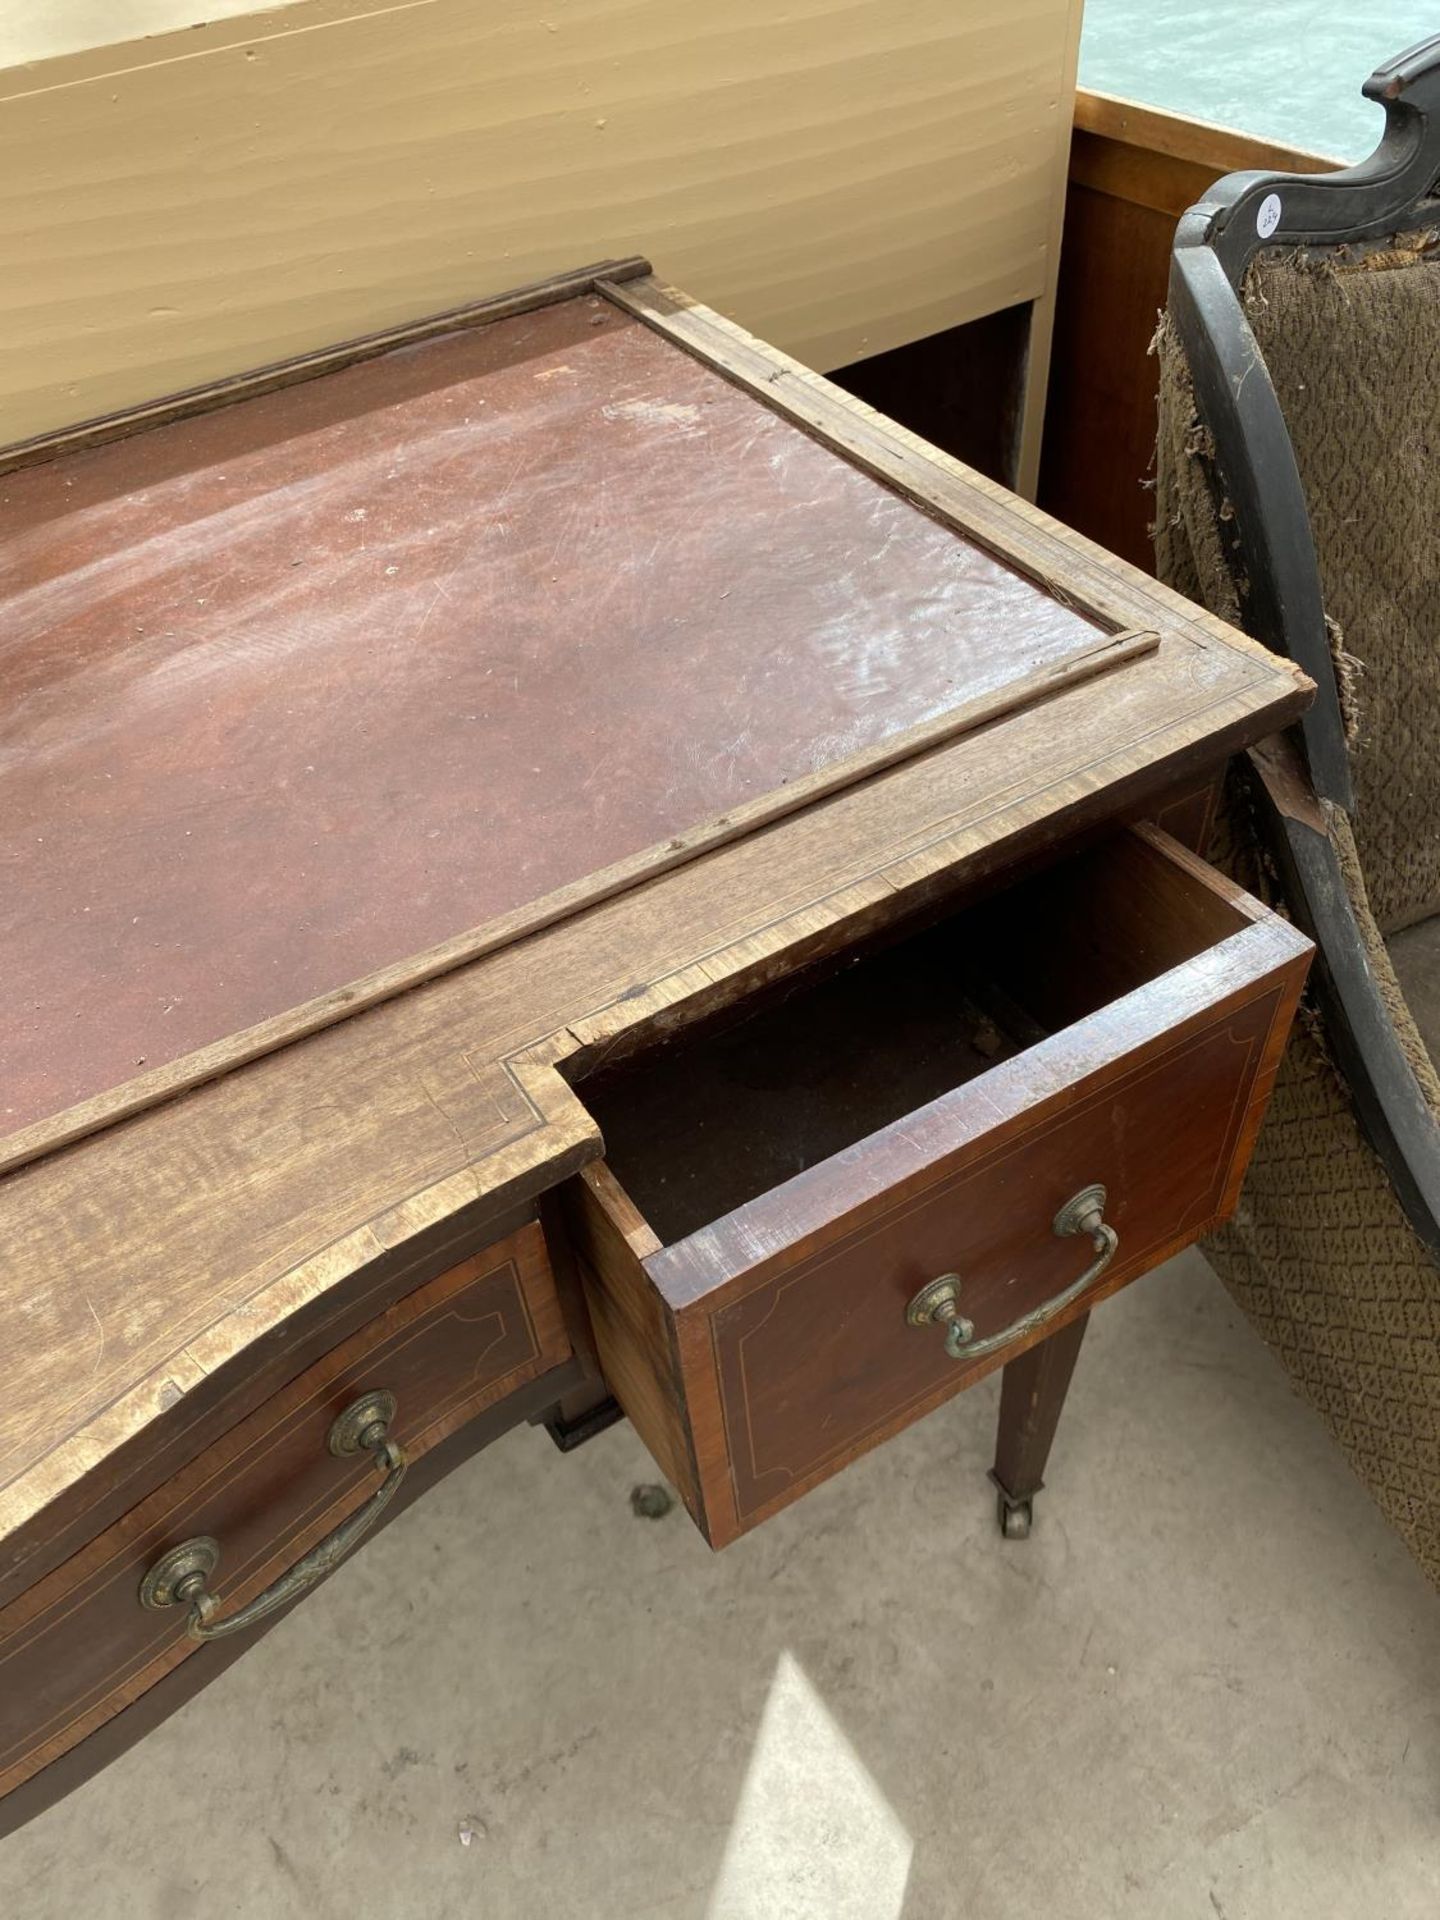 AN EDWARDIAN AND MAHOGANY INLAY DESK ON TAPERED LEGS AND SPADE FEET - Image 5 of 5